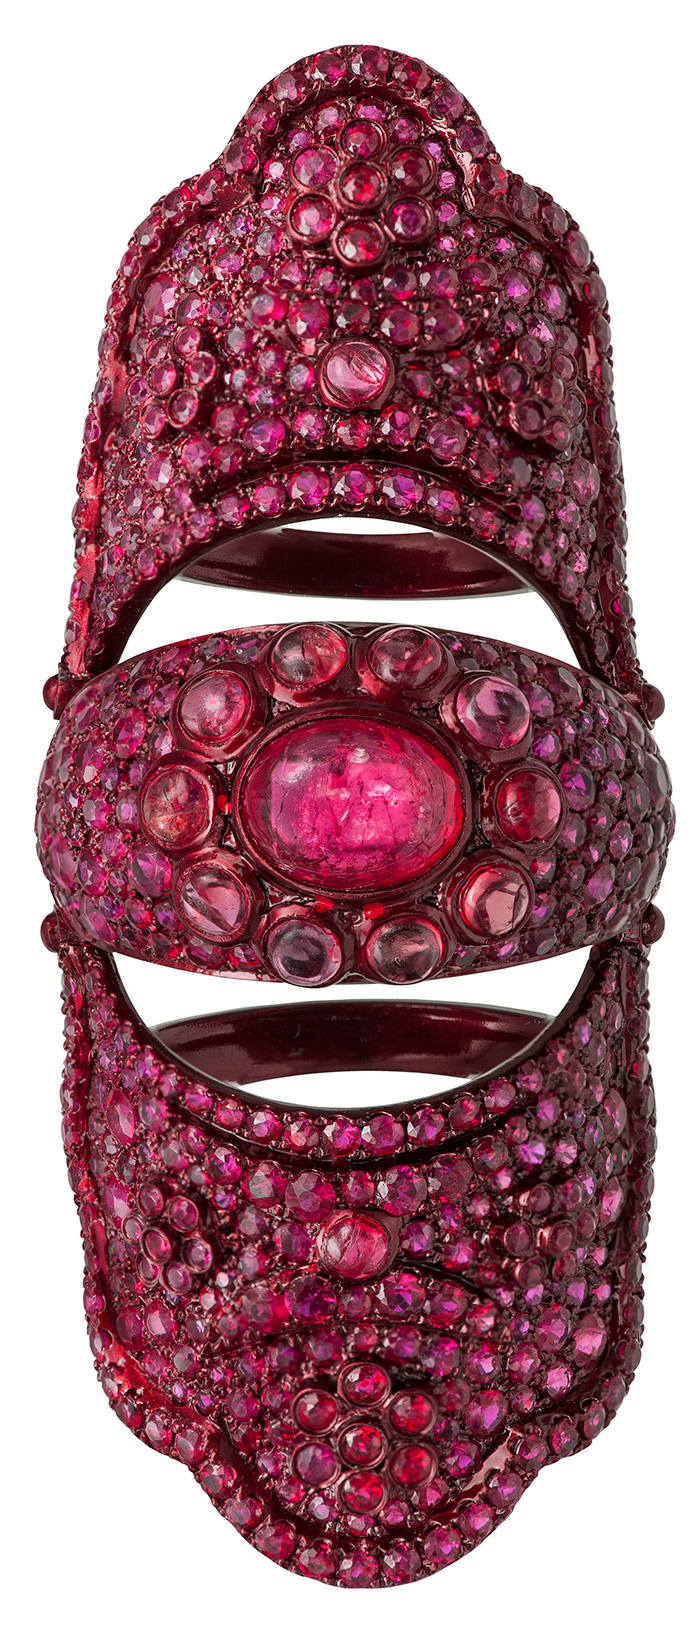 Knuckle ring from the Scarlet Empress Collection by Lydia Courteille